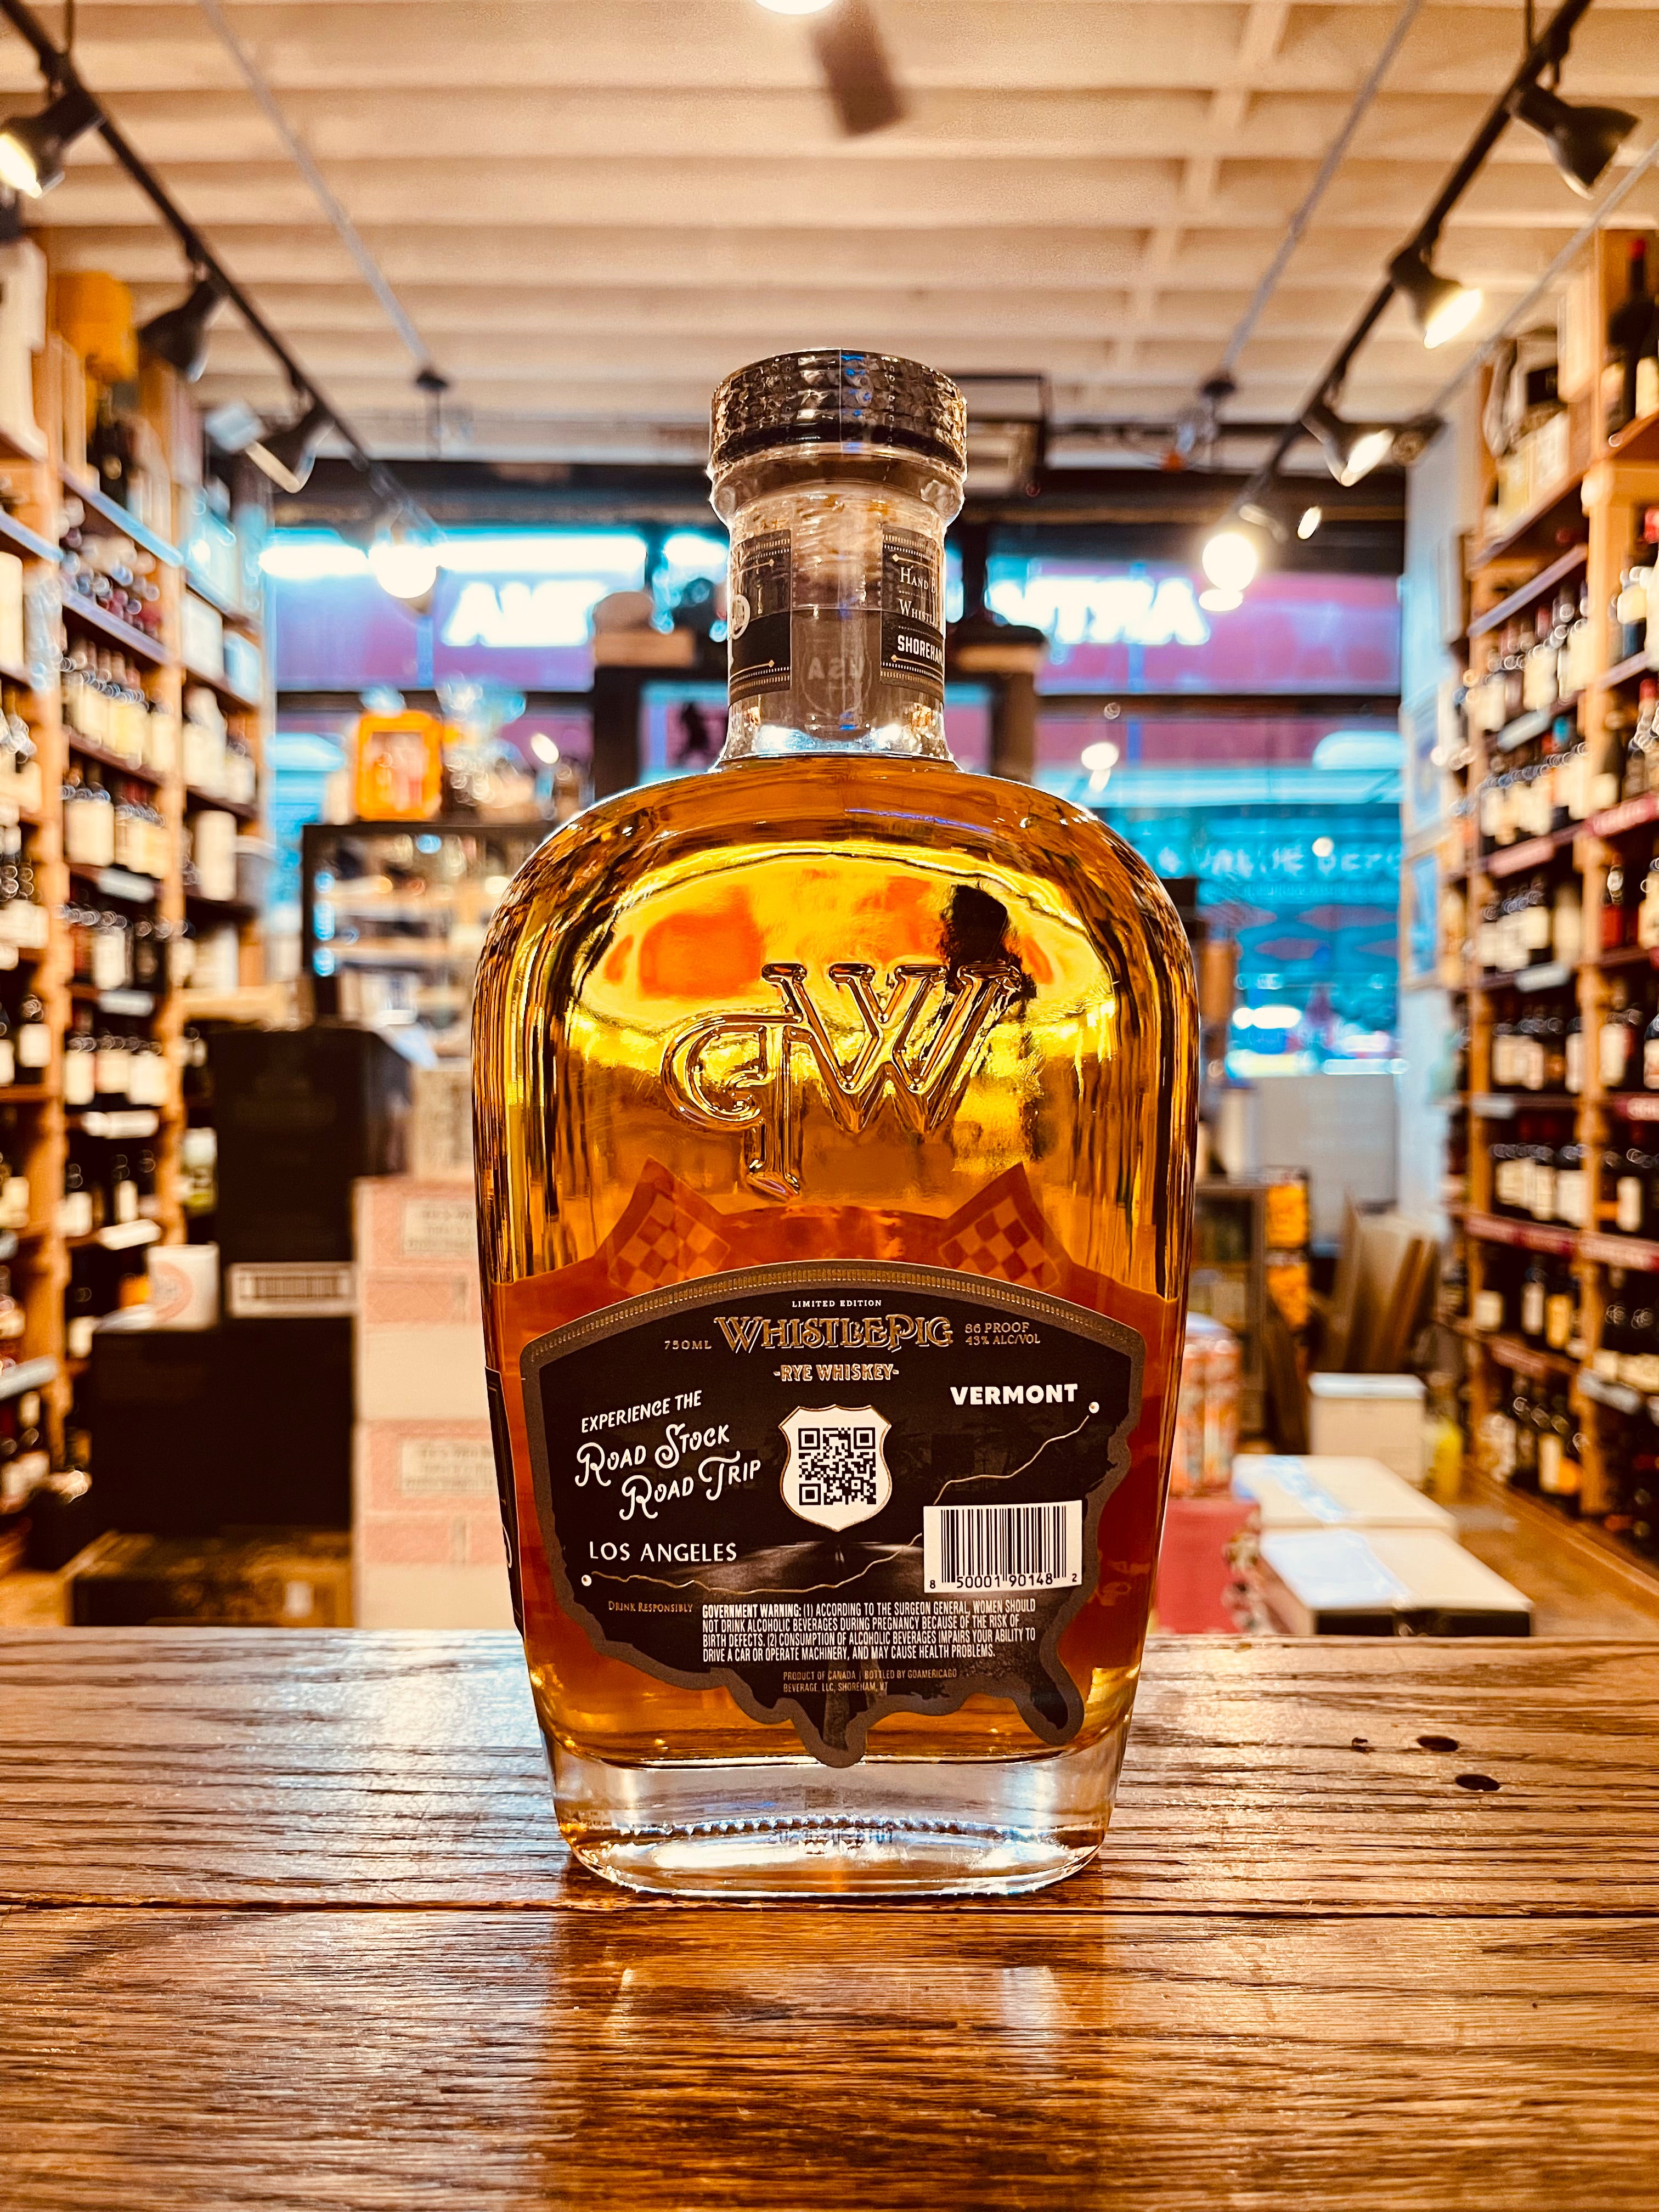 Whistle Pig Roadstock Rye Whiskey 750mL the backside of a clear glass bottle thats robust in shape with rounded shoulders and a black label and wooden top